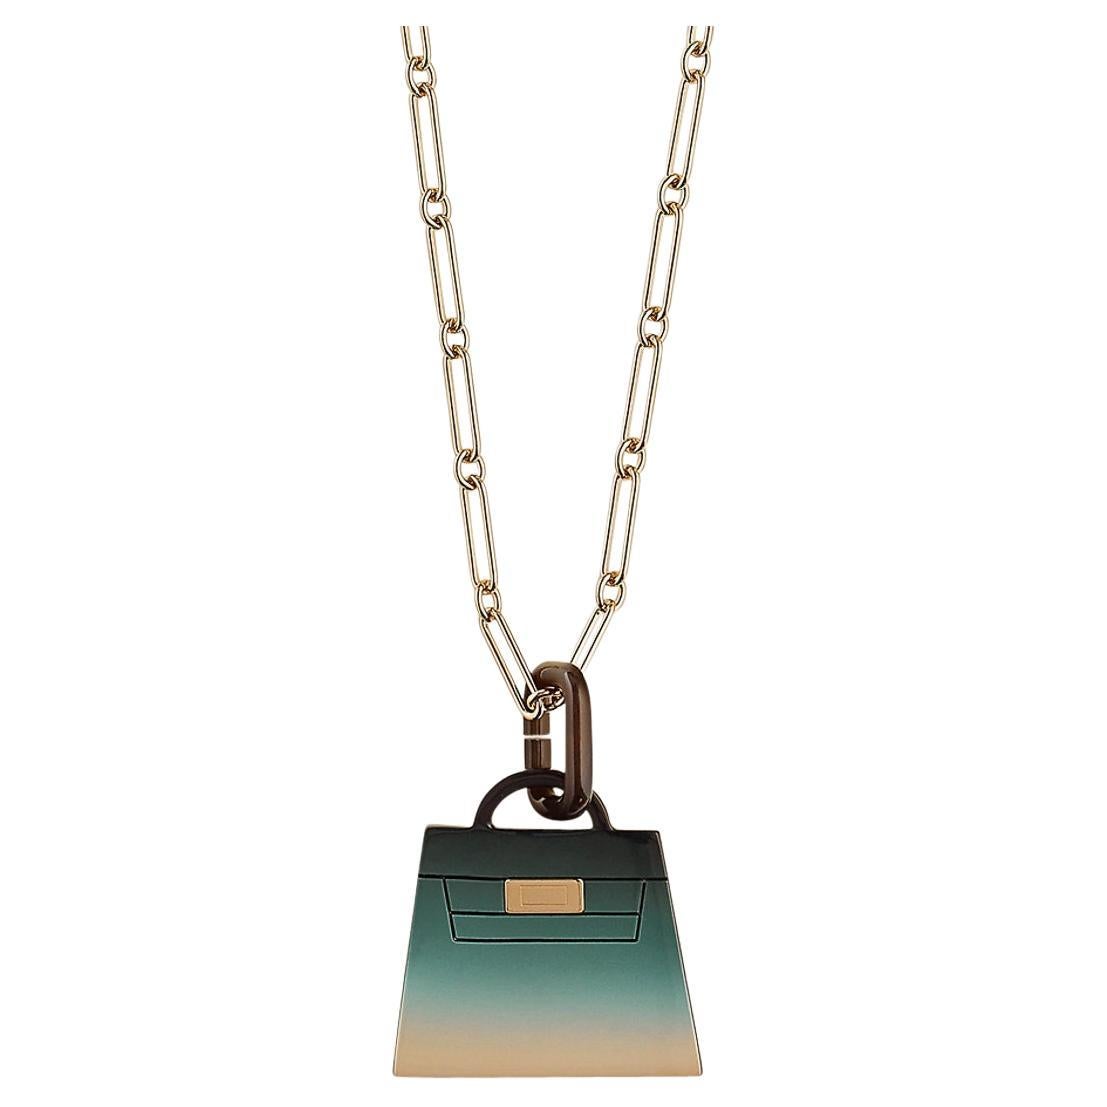 Hermes Fusion Amulette Kelly Pendant By the Sea Necklace